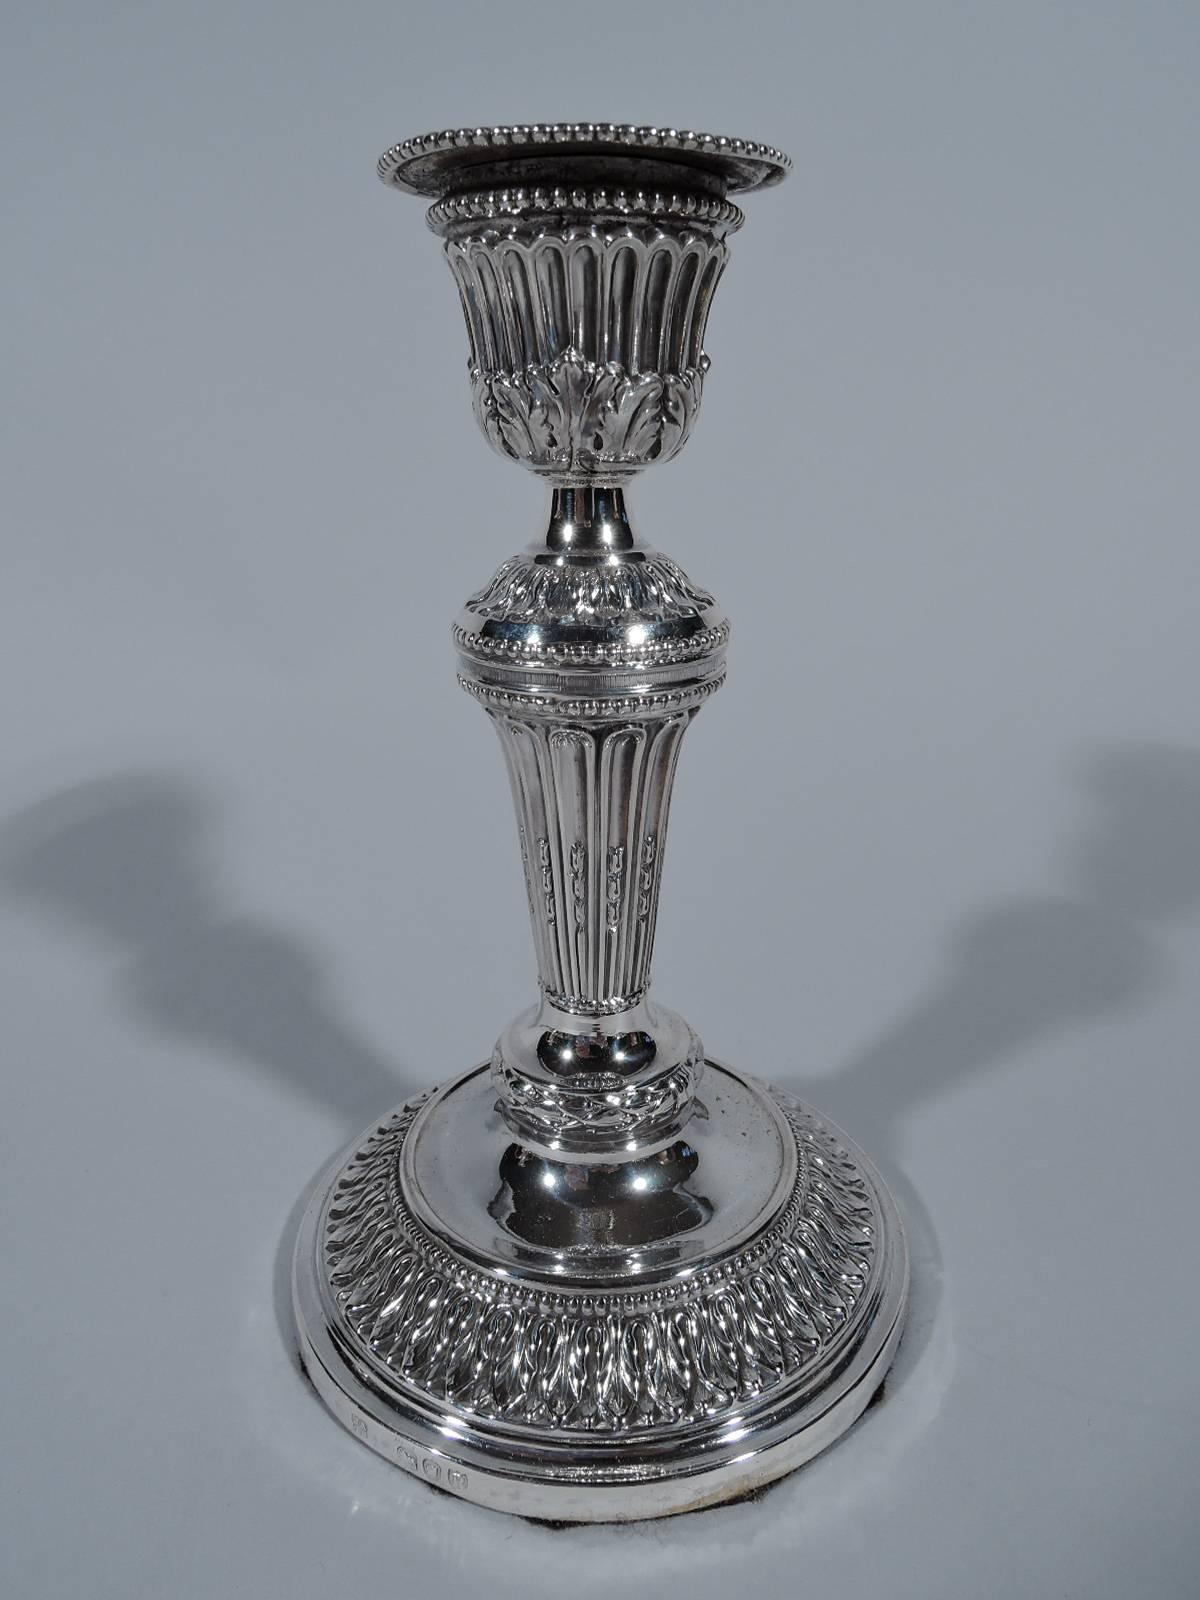 Neoclassical Revival Pair of English Neoclassical Sterling Silver Column Candlesticks